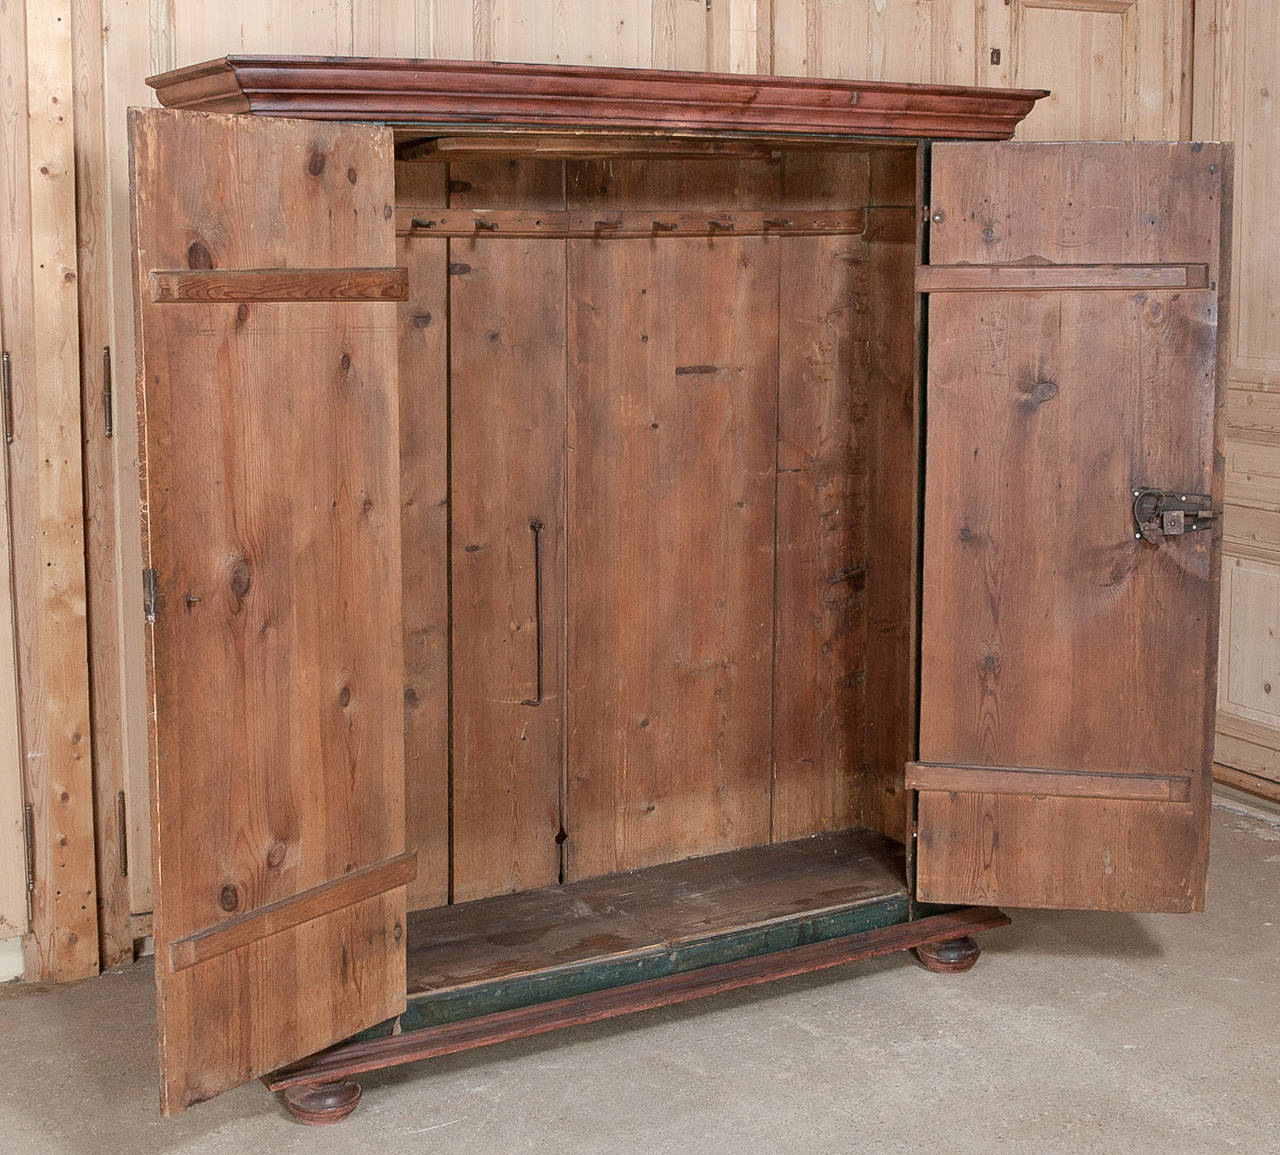 The stately, tailored lines of Swiss furniture always provides a versatility and this armoire is no exception. Handcrafted in the early 1800s, it has been fitted with a pair of doors mounted on intricately hand-forged steel strap hinges, with steel